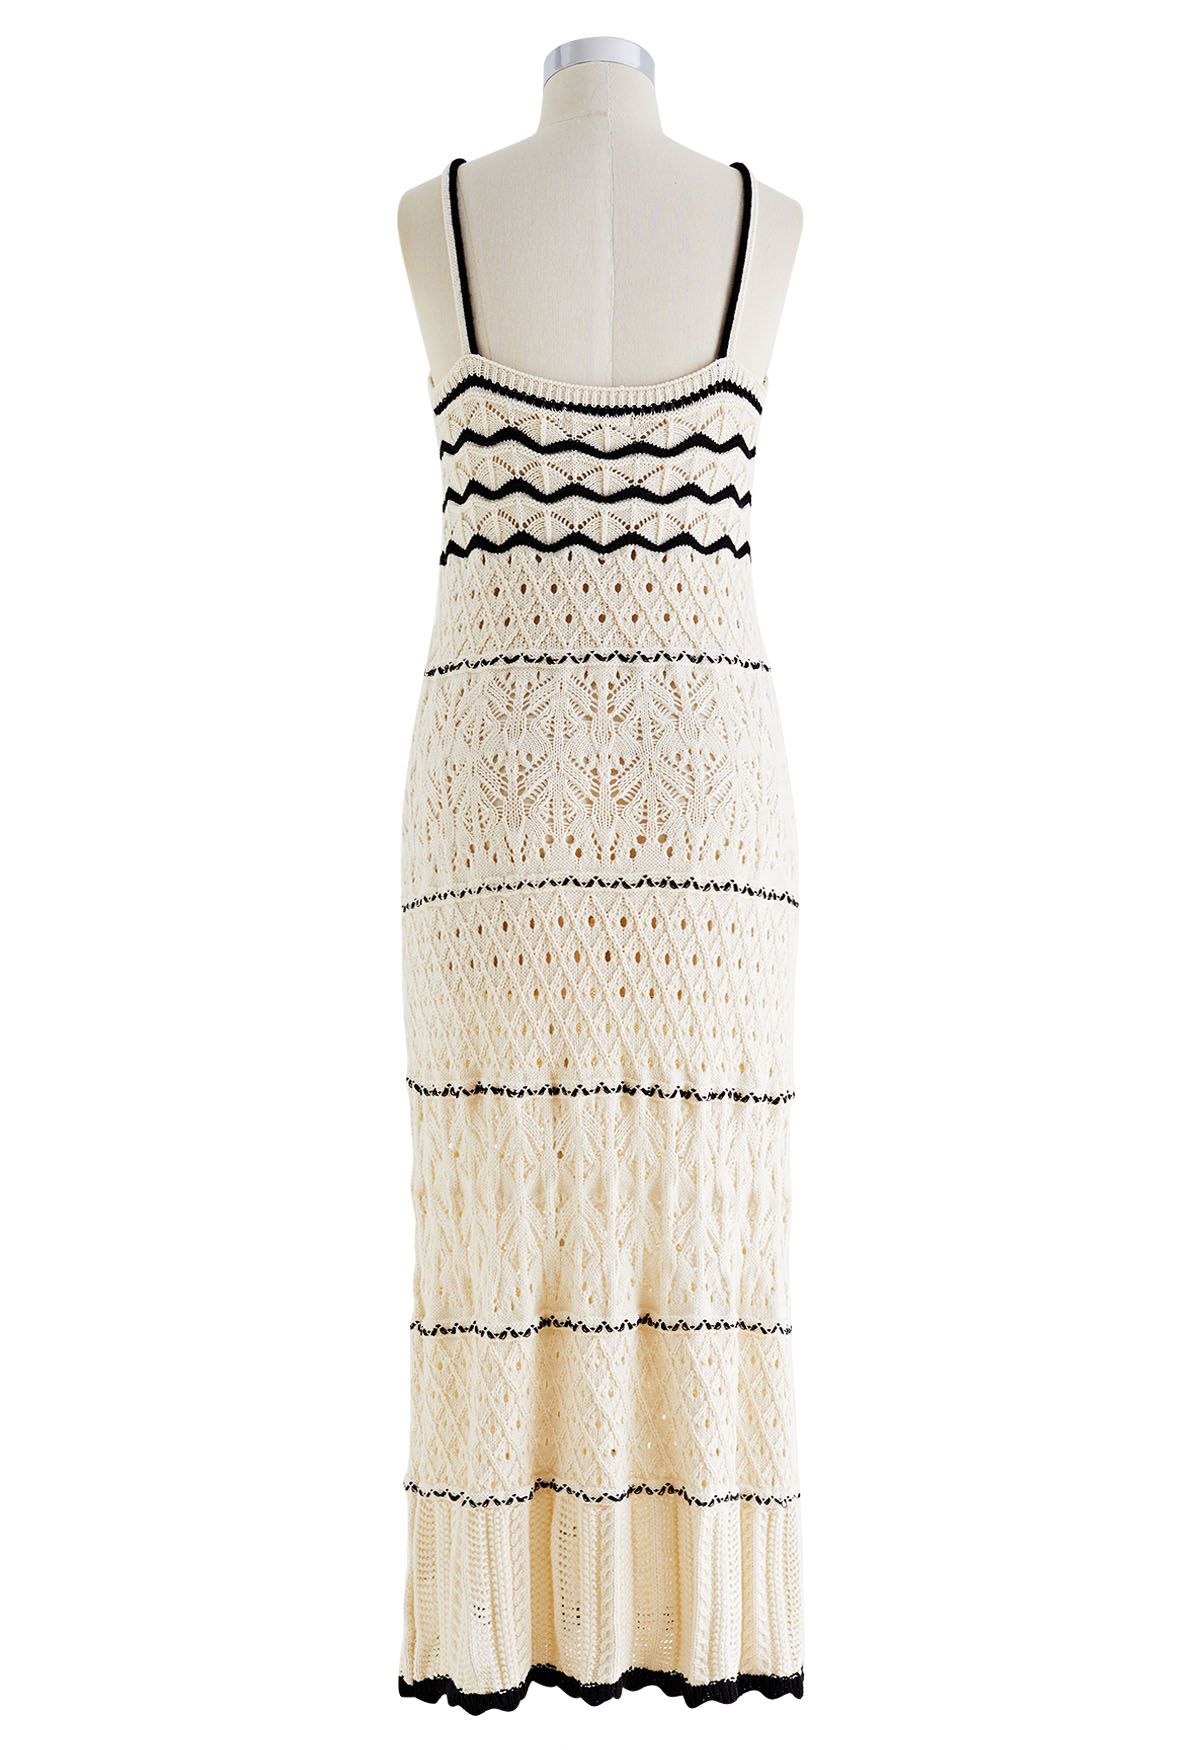 Contrast Lines Hollow Out Knit Cami Dress